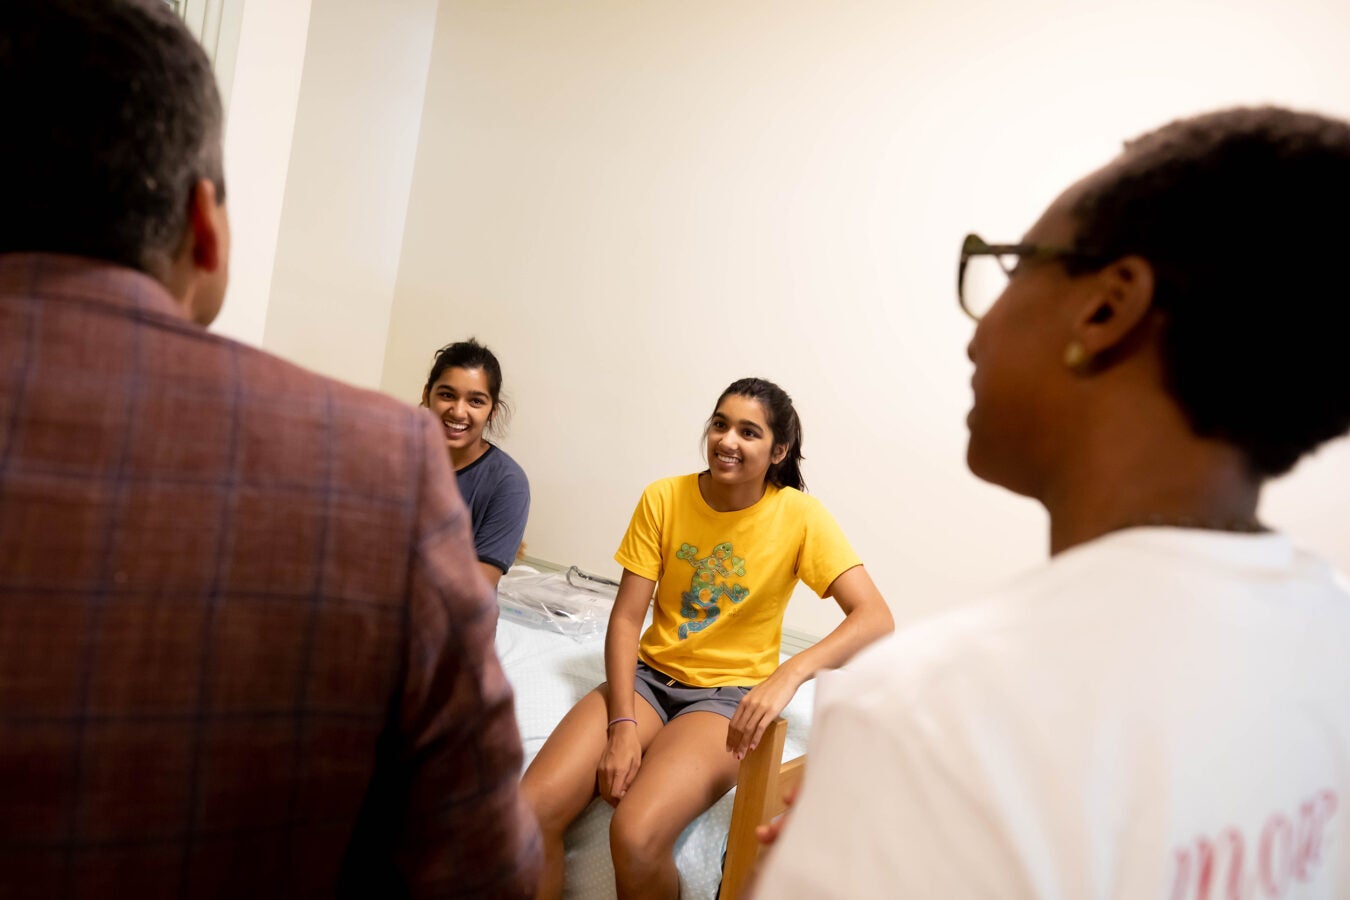 Twins Anisa (left) and Sirina Prasad chat with Deans Rakesh Khurana and Claudine Gay in Sirina’s room.